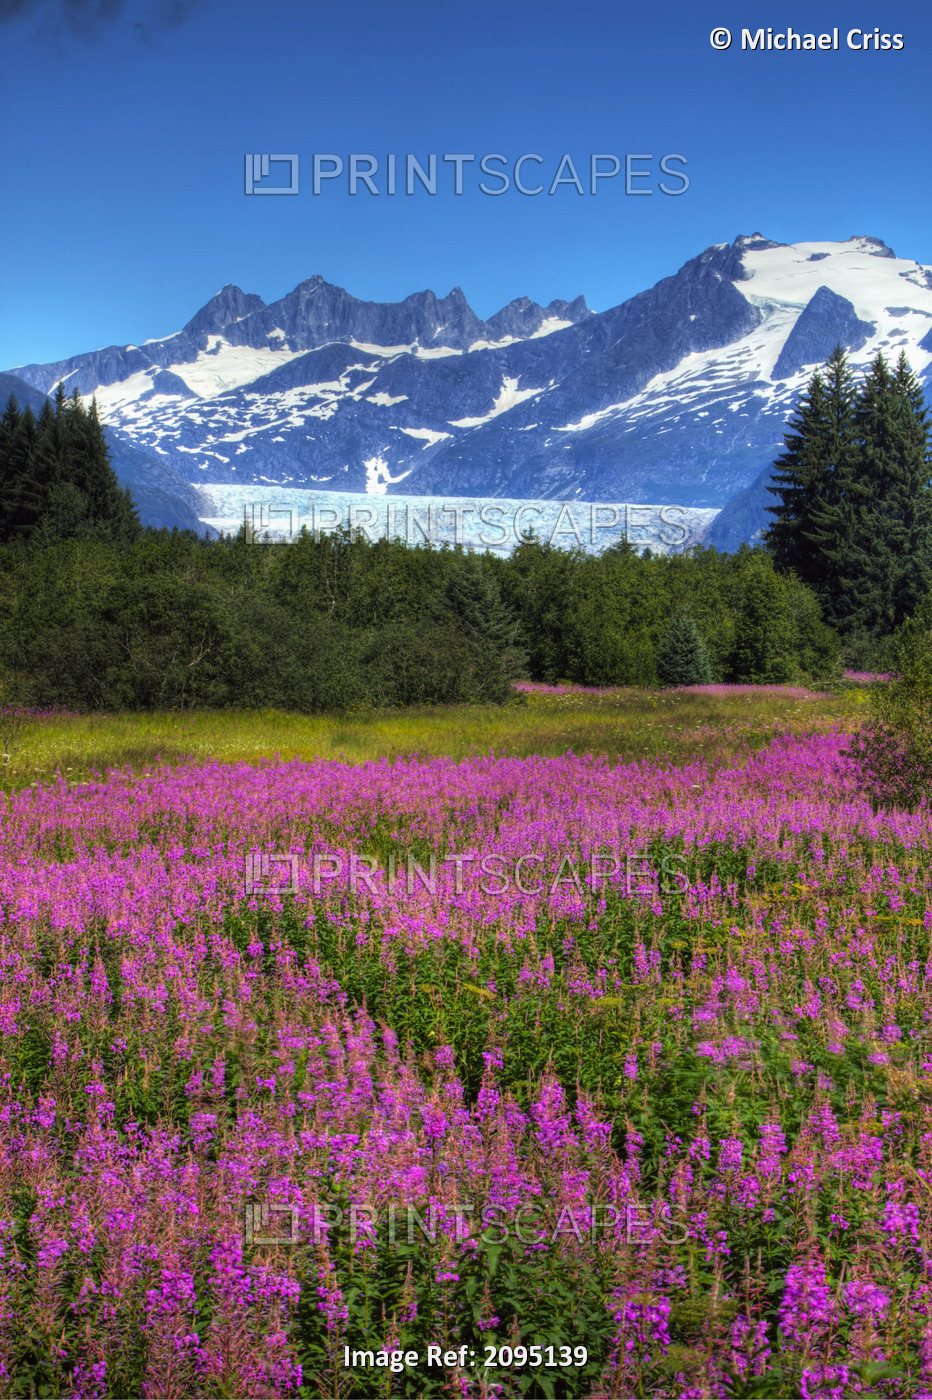 View Of The Mendenhall Glacier With A Field Of Fireweed In The Foreground, ...